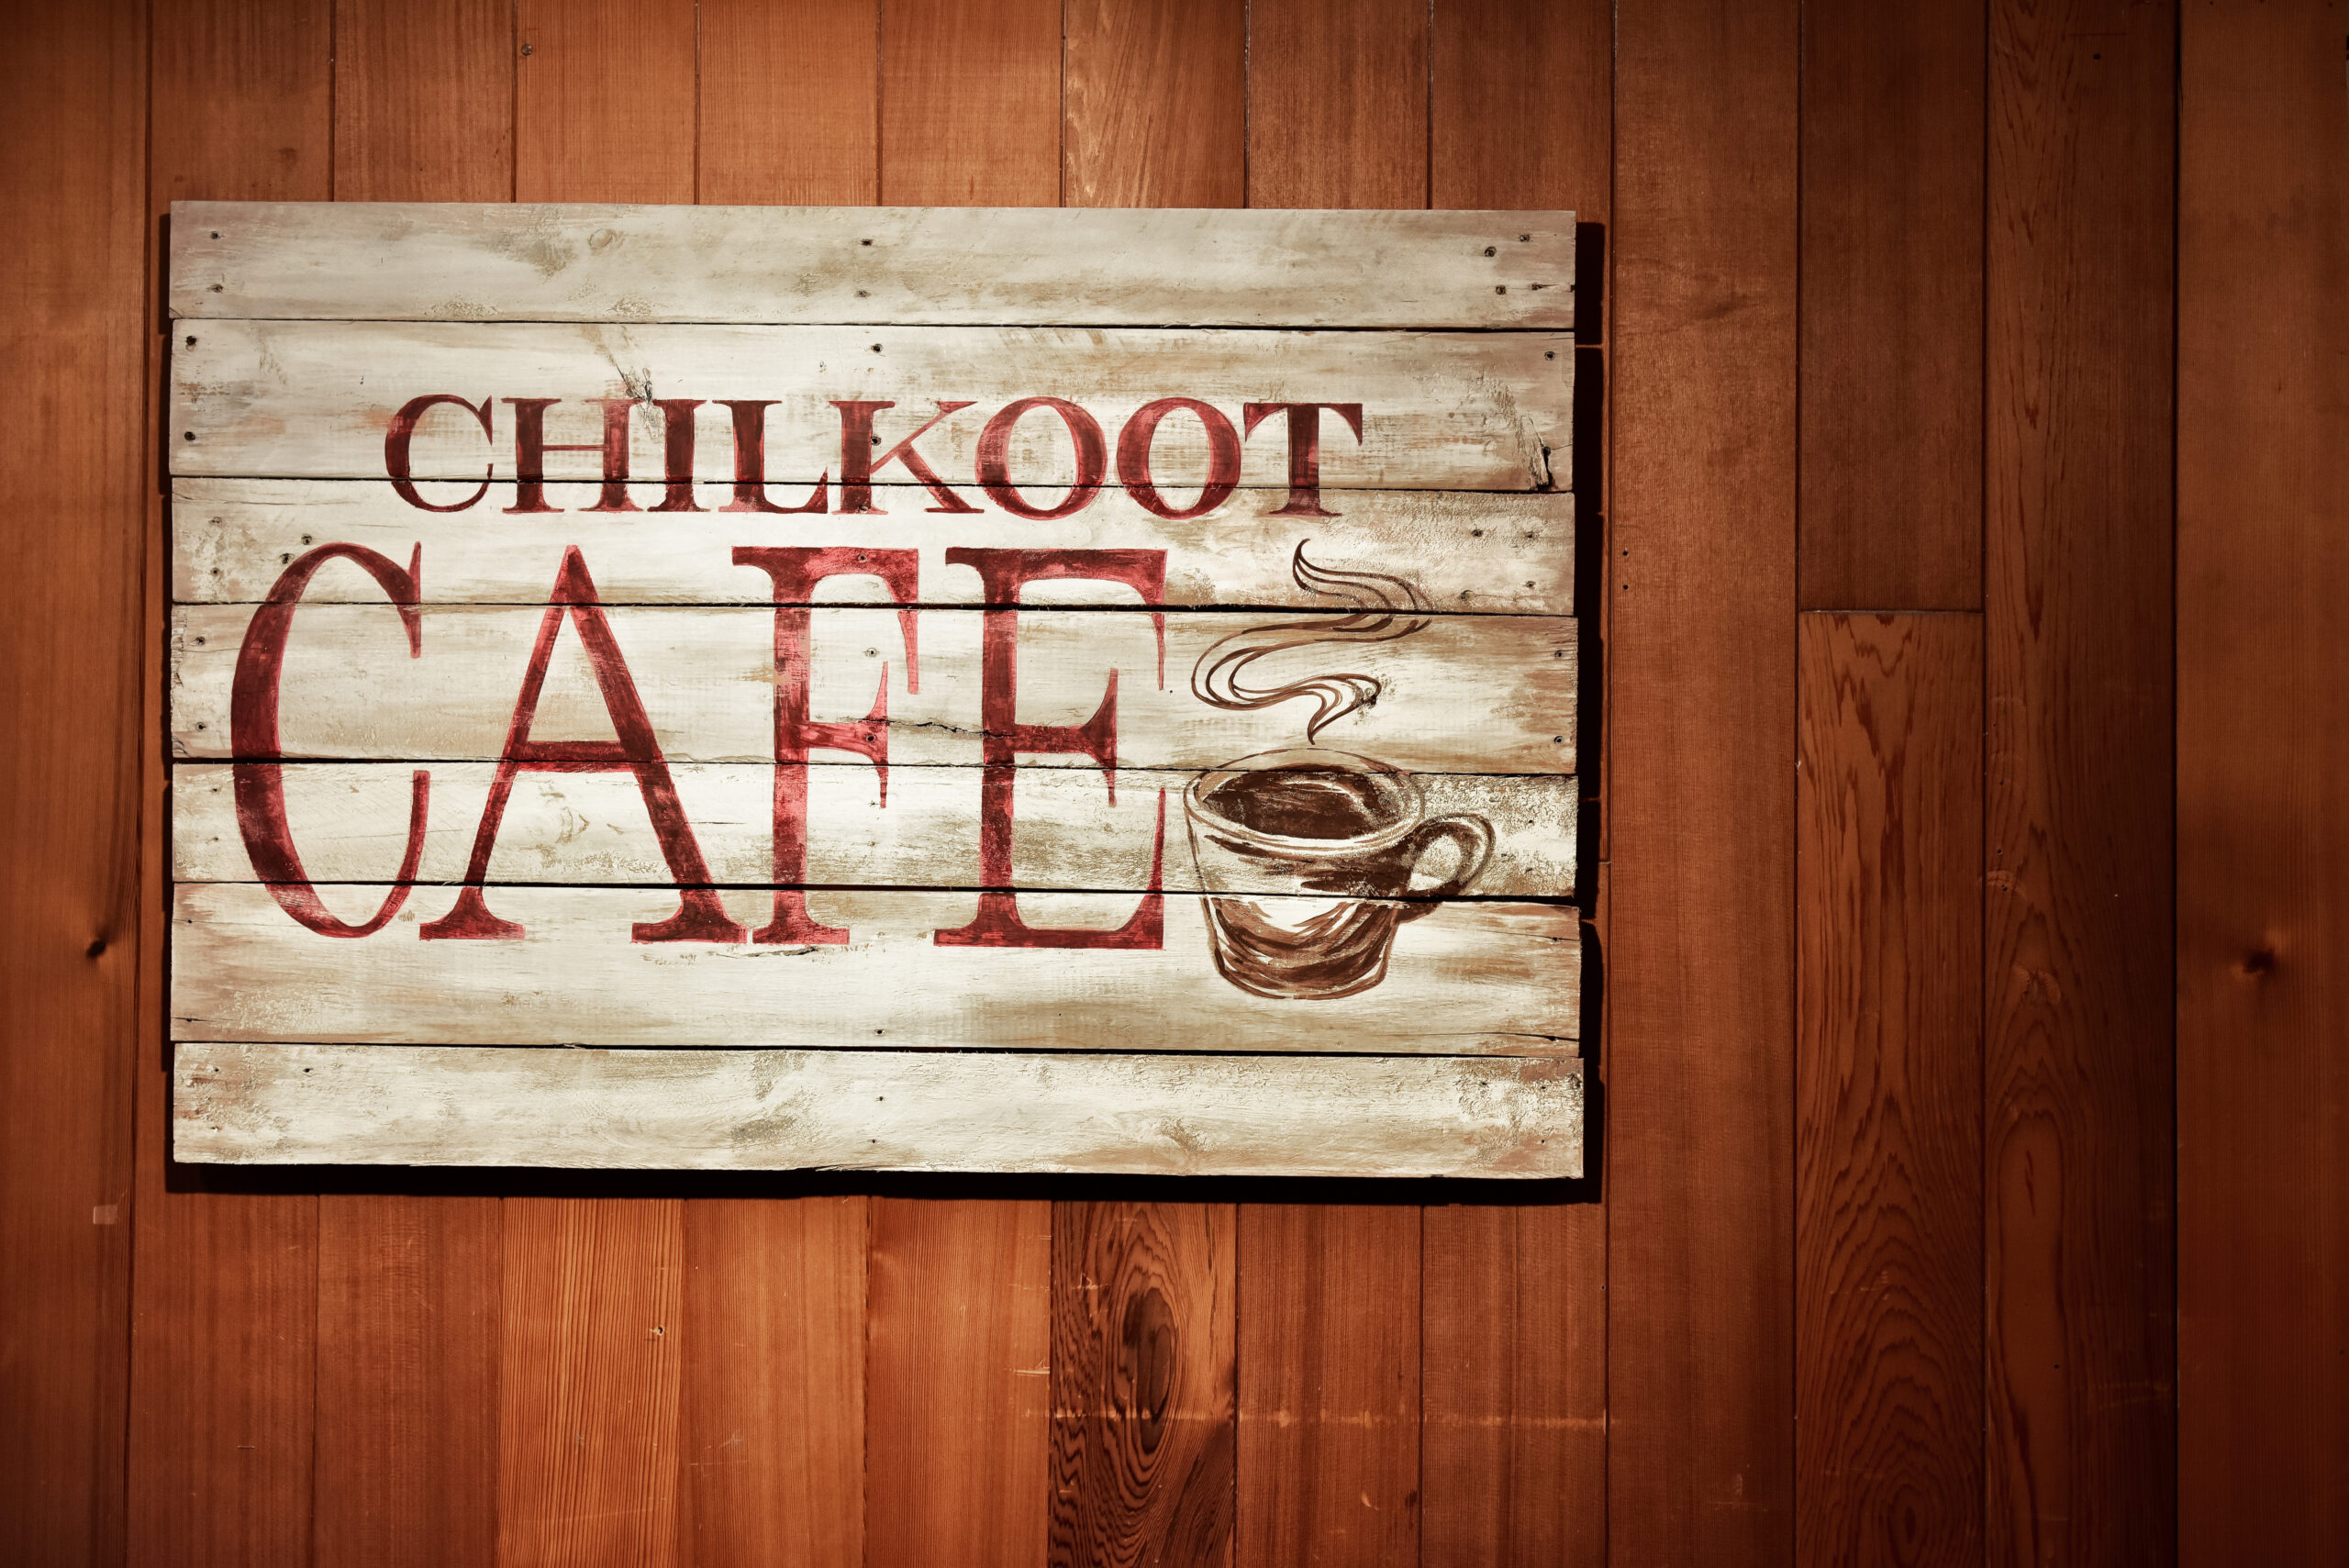 Chilkoot Cafe